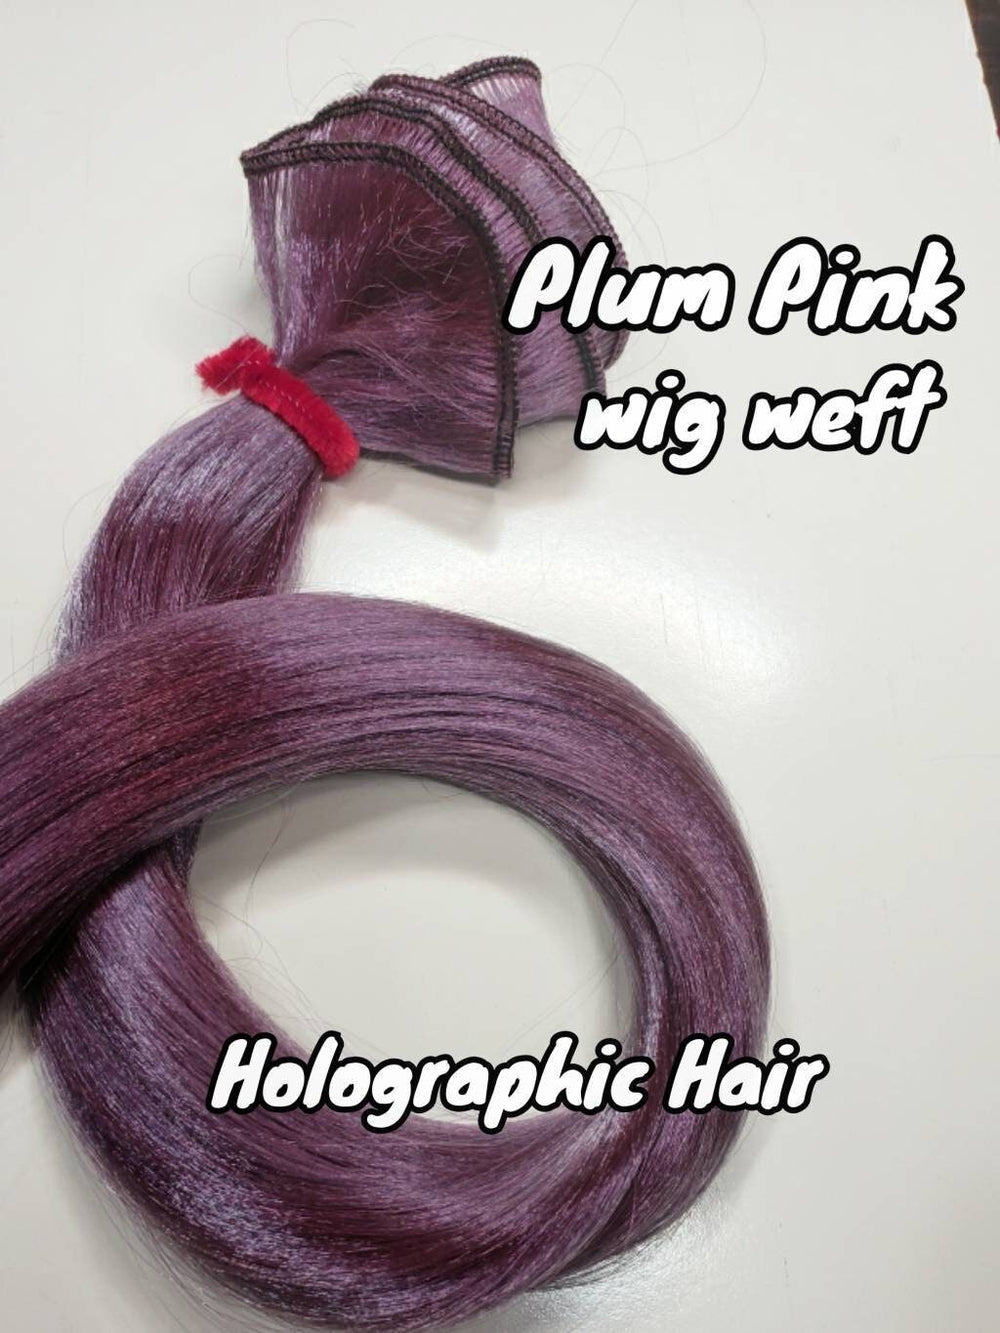 DG-HQ™ Wig Weft Nylon Plum Pink NC116A Holographic Nylon Weft 30"Wx20"L Doll Hair for Making Fashion Doll Wigs Standard Temperature